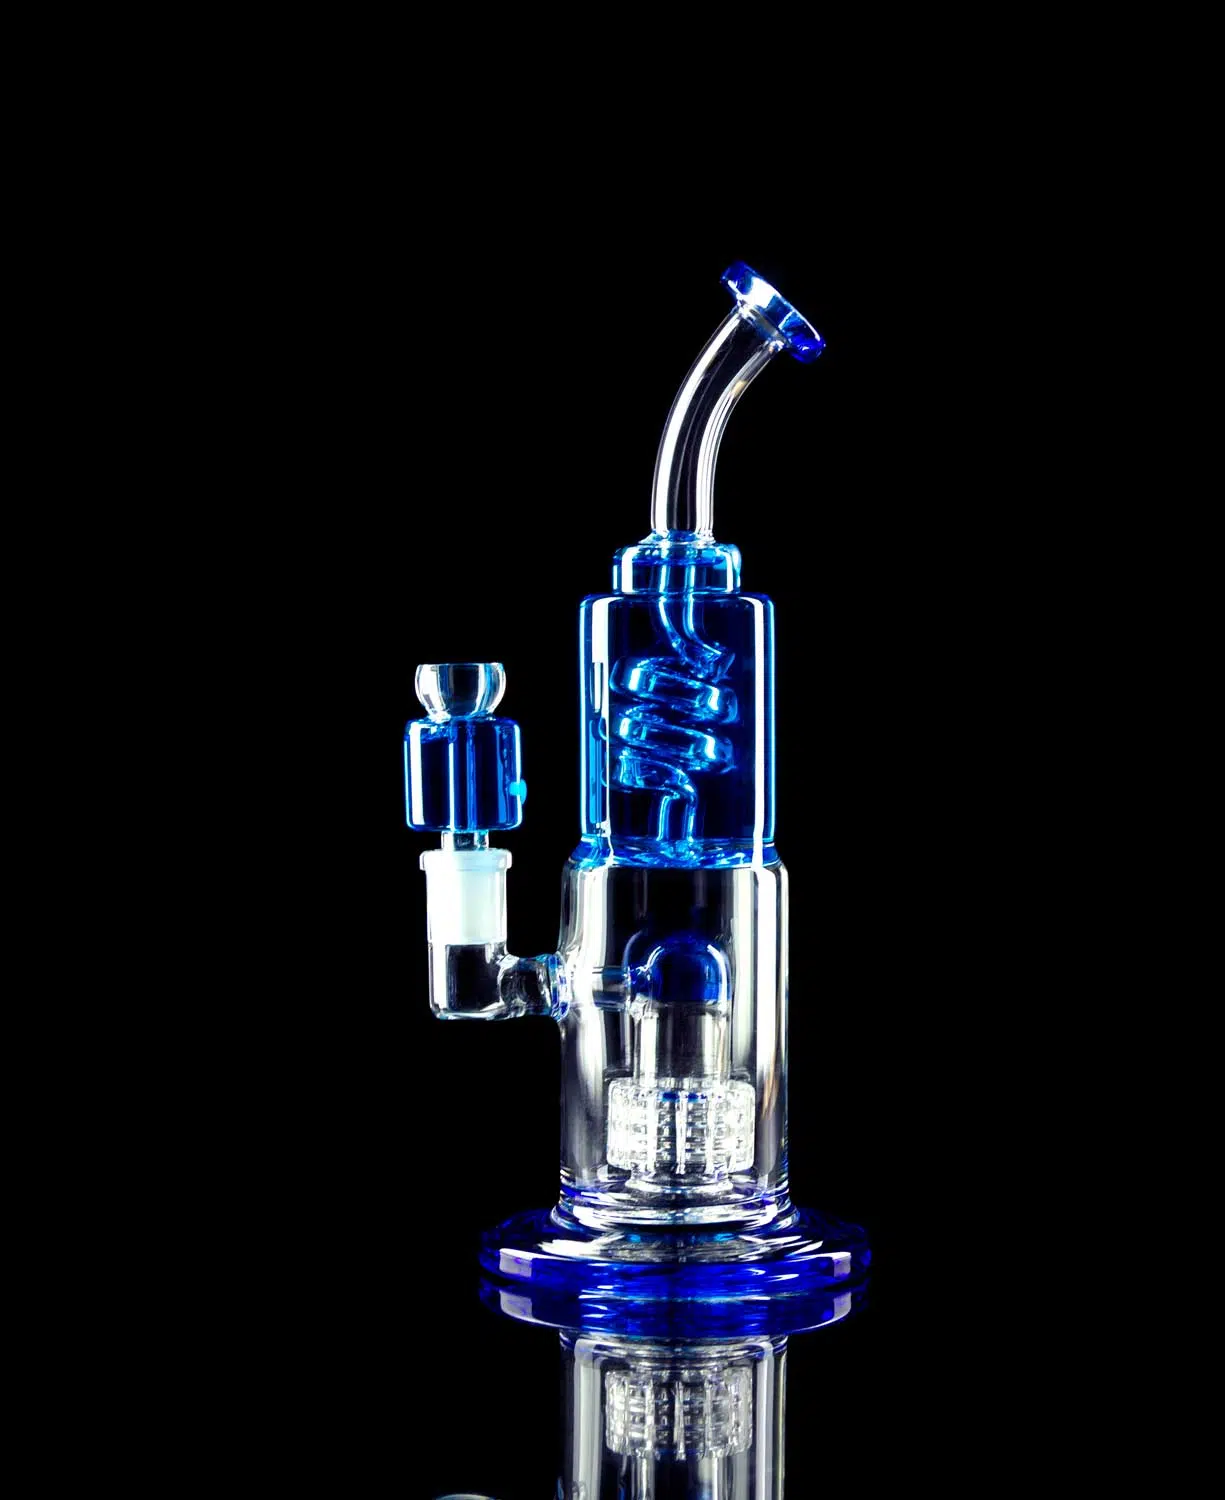 glycerin coil bong made from borosilicate glass